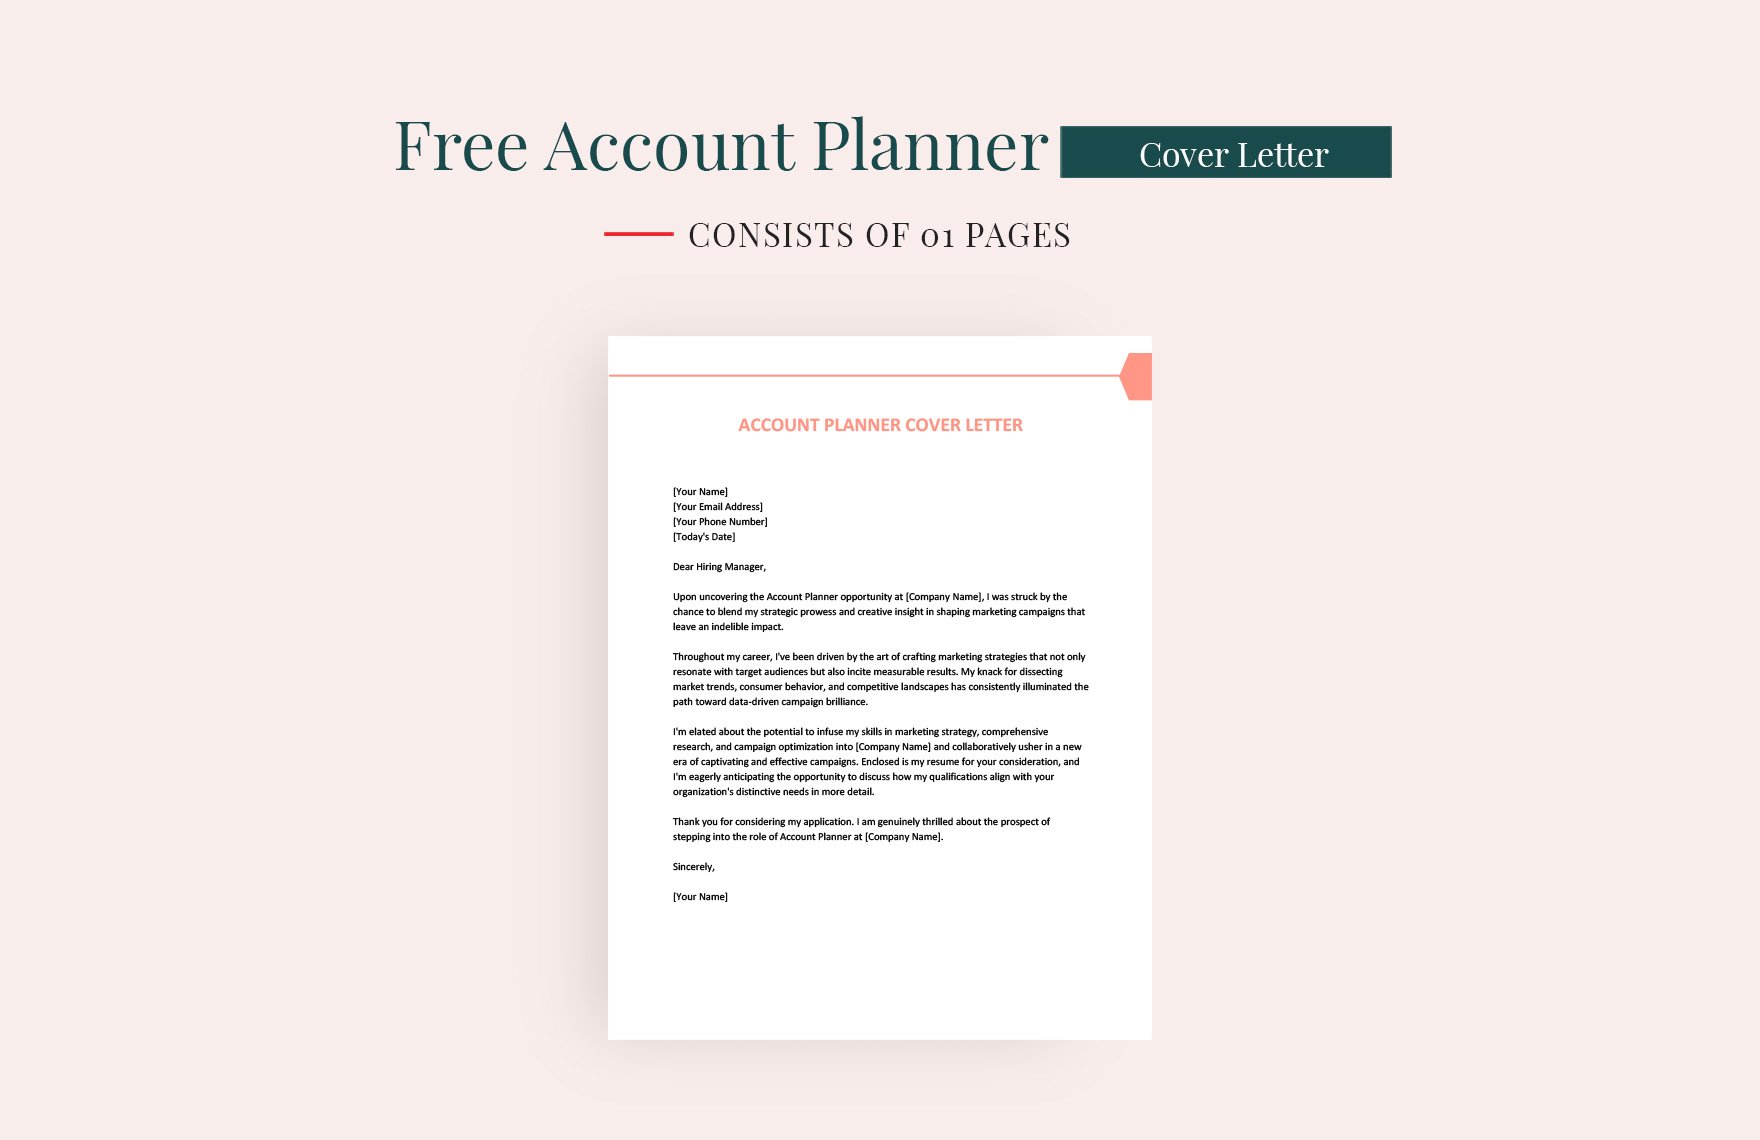 Account Planner Cover Letter in Word, Google Docs